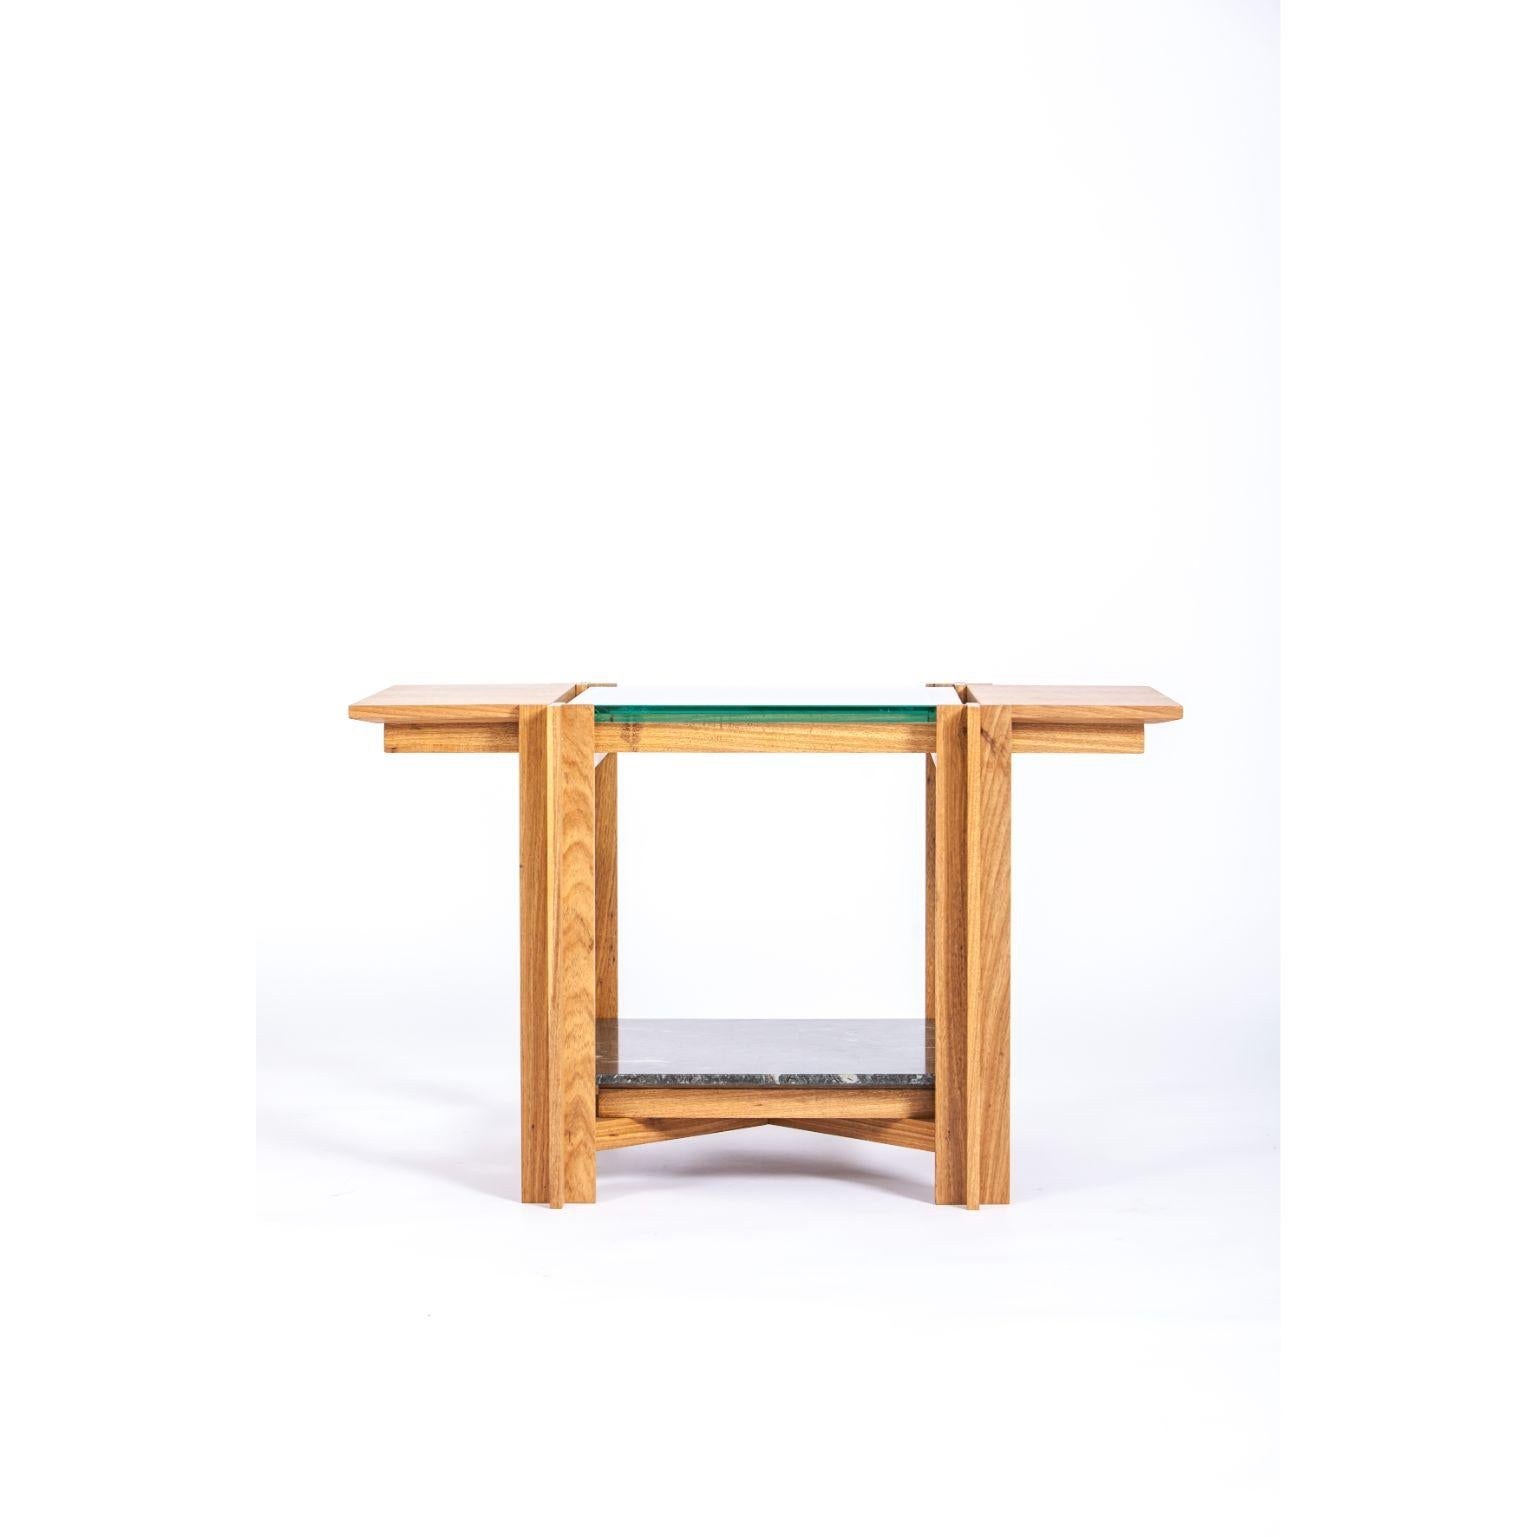 Mais - light freijo table with tabs - by Alva Design
Materials: Natural or darkened freijó + glass + granite (floral sandblasted green)
Dimensions: 83 x 49 x 50 cm

Alva is a furniture and objects design office, formed by brothers Susana Bastos,